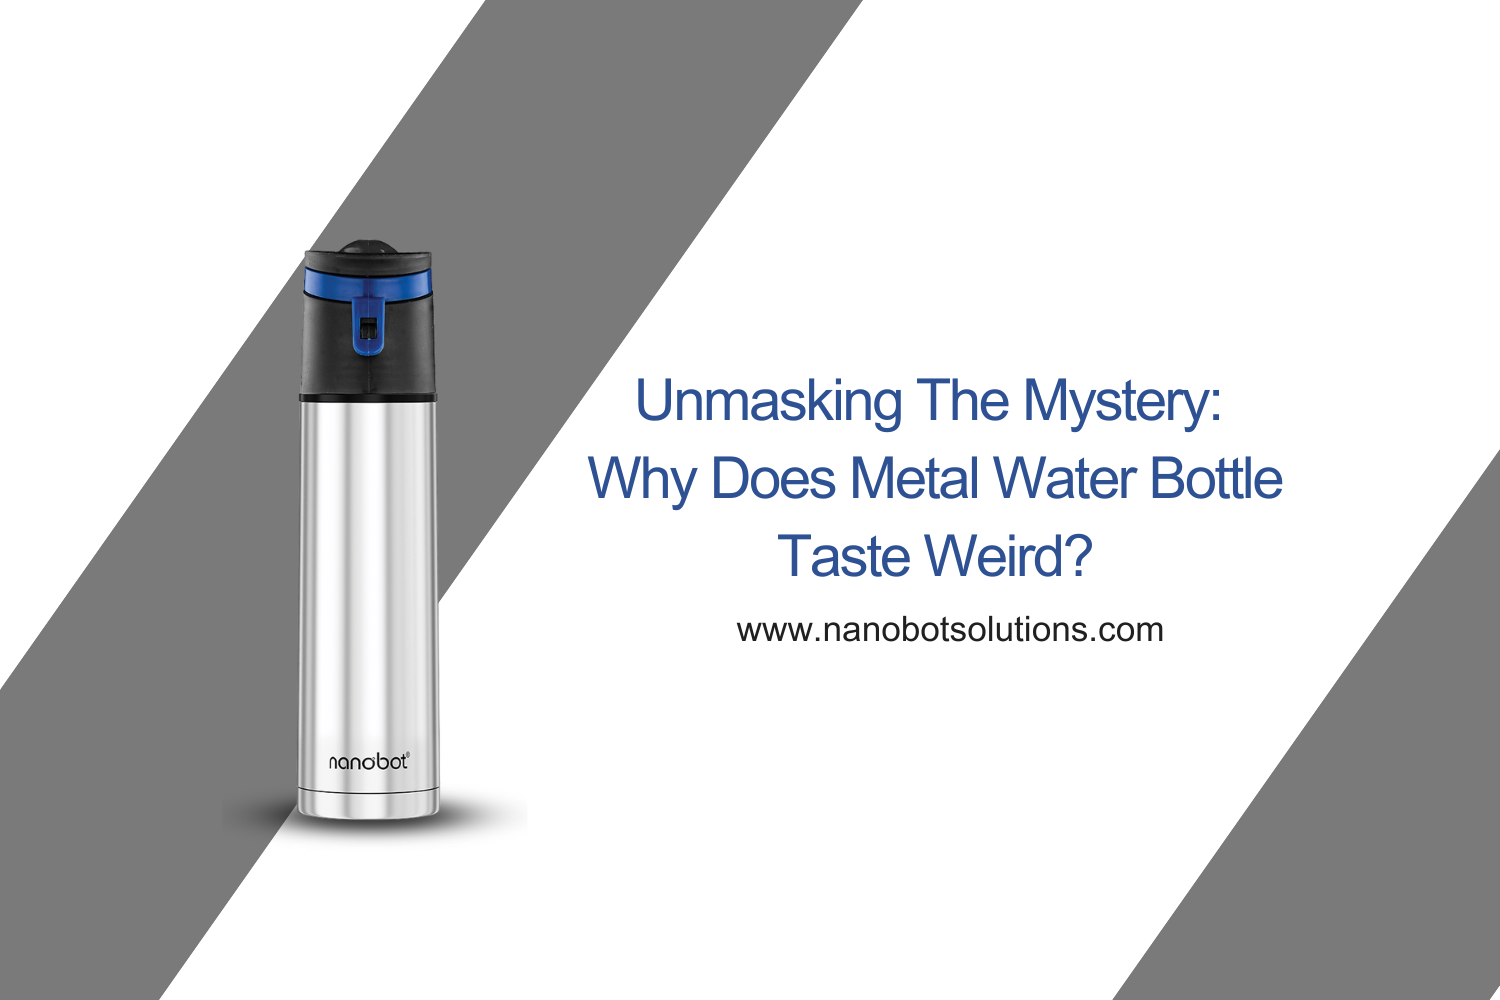 Unmasking the Mystery: Why Does Metal Water Bottle Taste Weird?